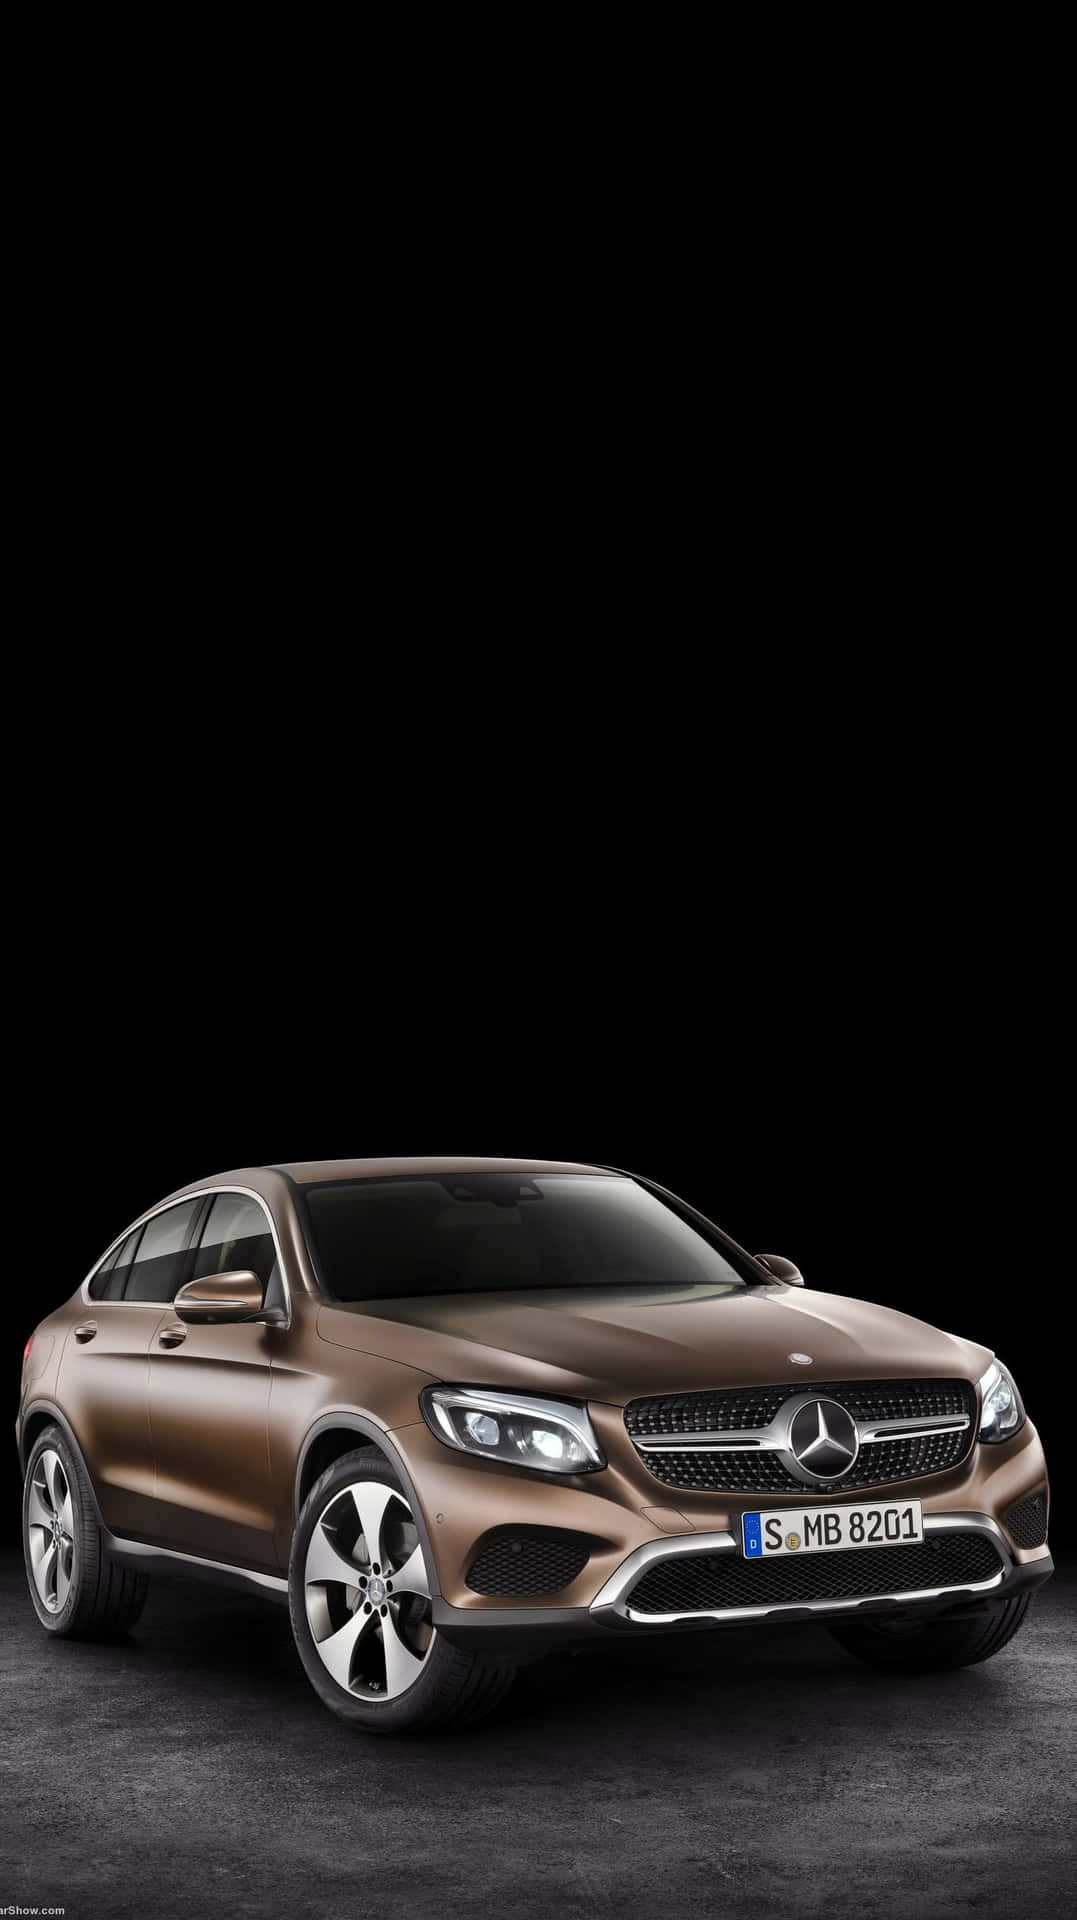 The Mercedes C Class Coupe Is Shown In A Dark Background Wallpaper